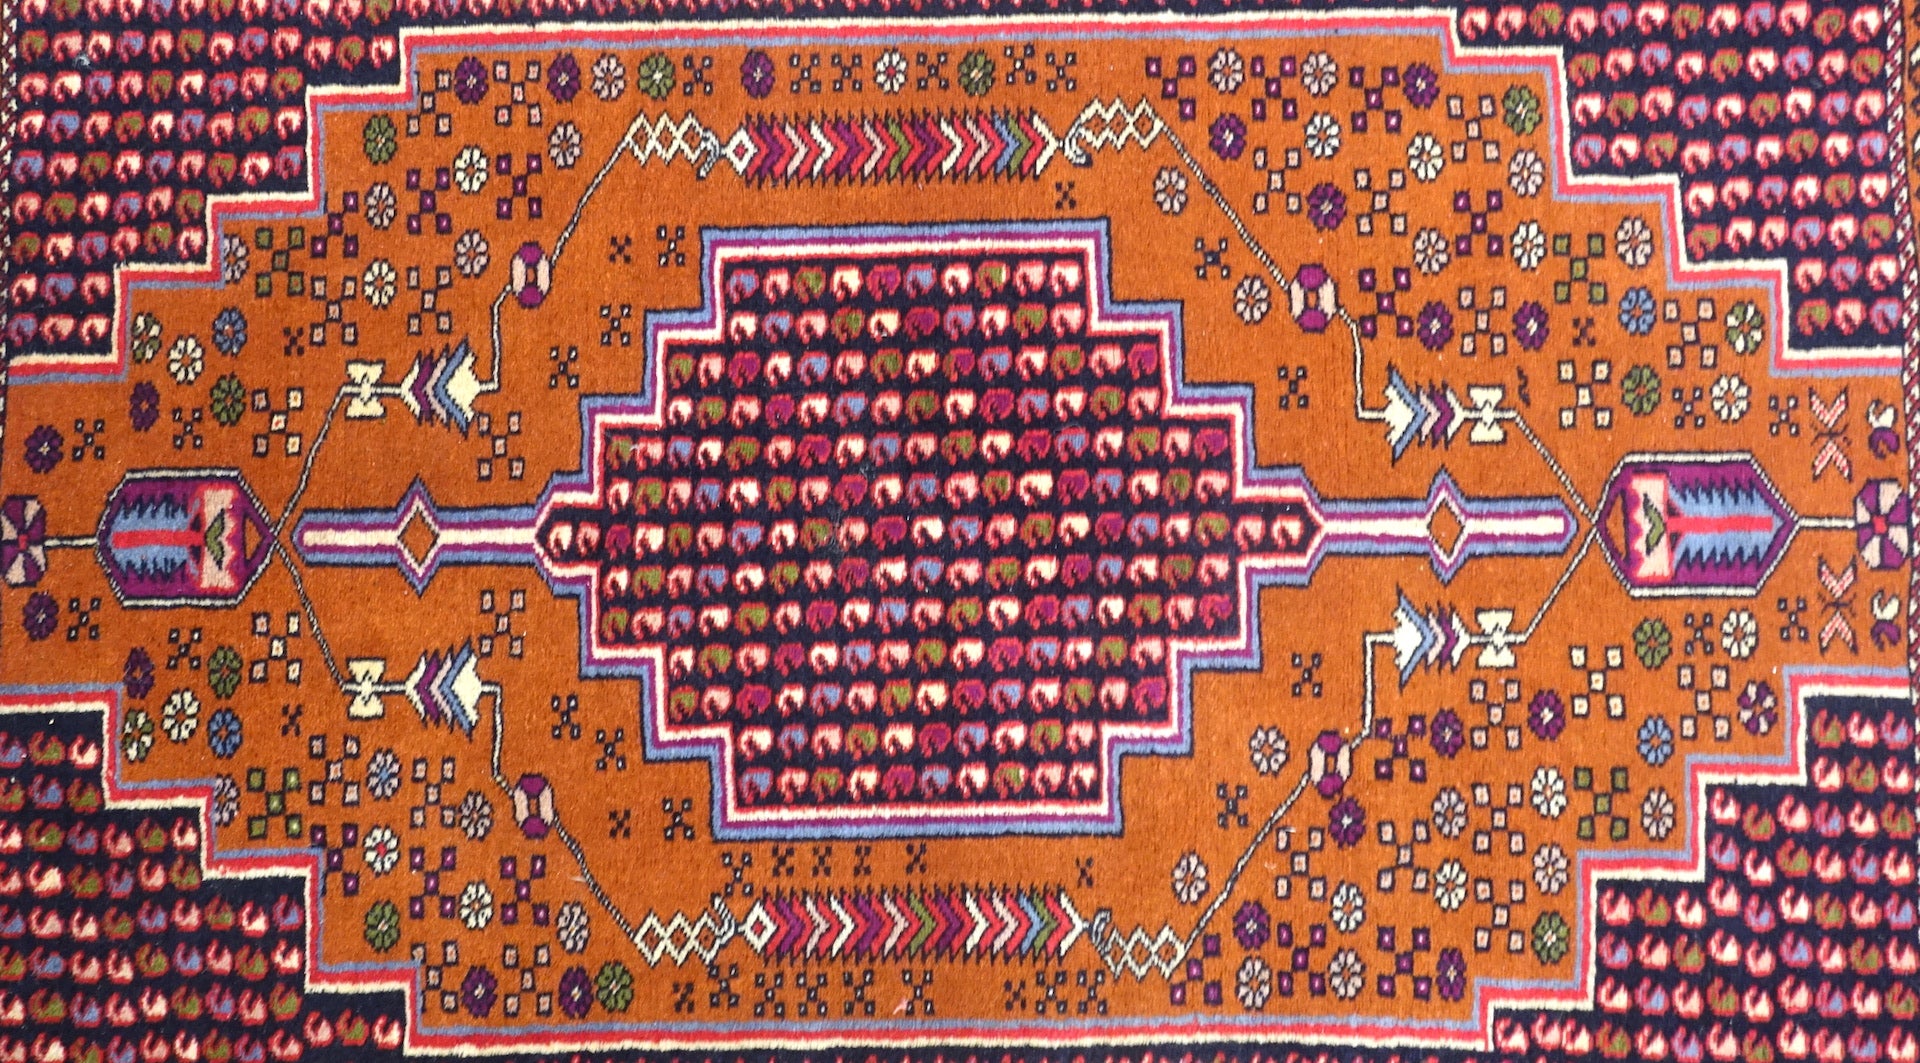 A 4 by 6 feet balochi wool rug. Shades used are primarily brick, purple, green, beige, black and cherry.